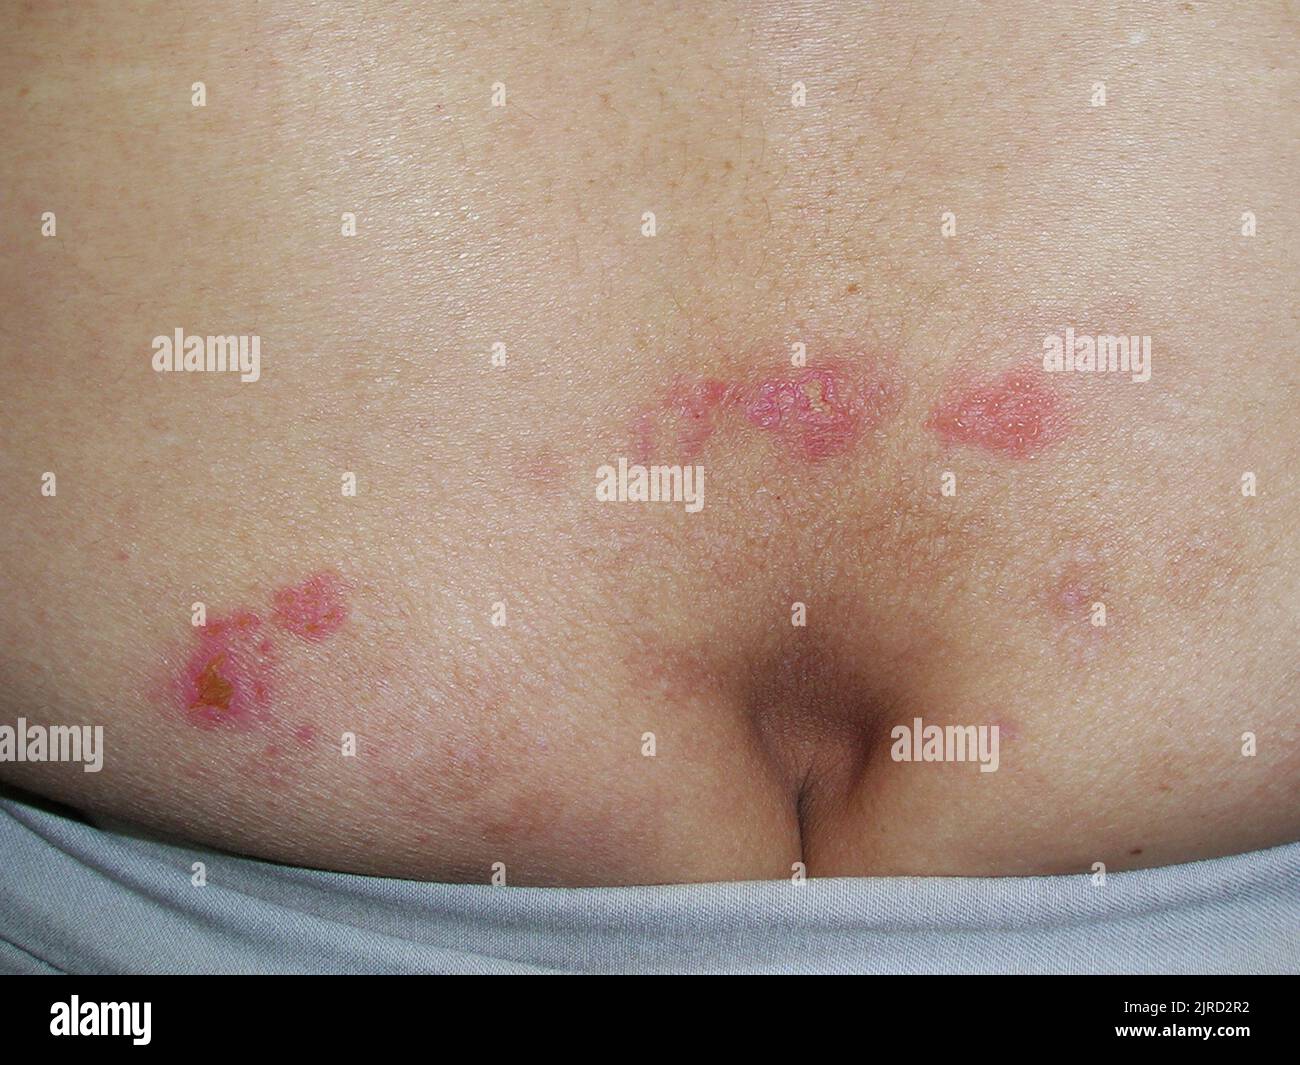 Genital herpes infection Stock Photo